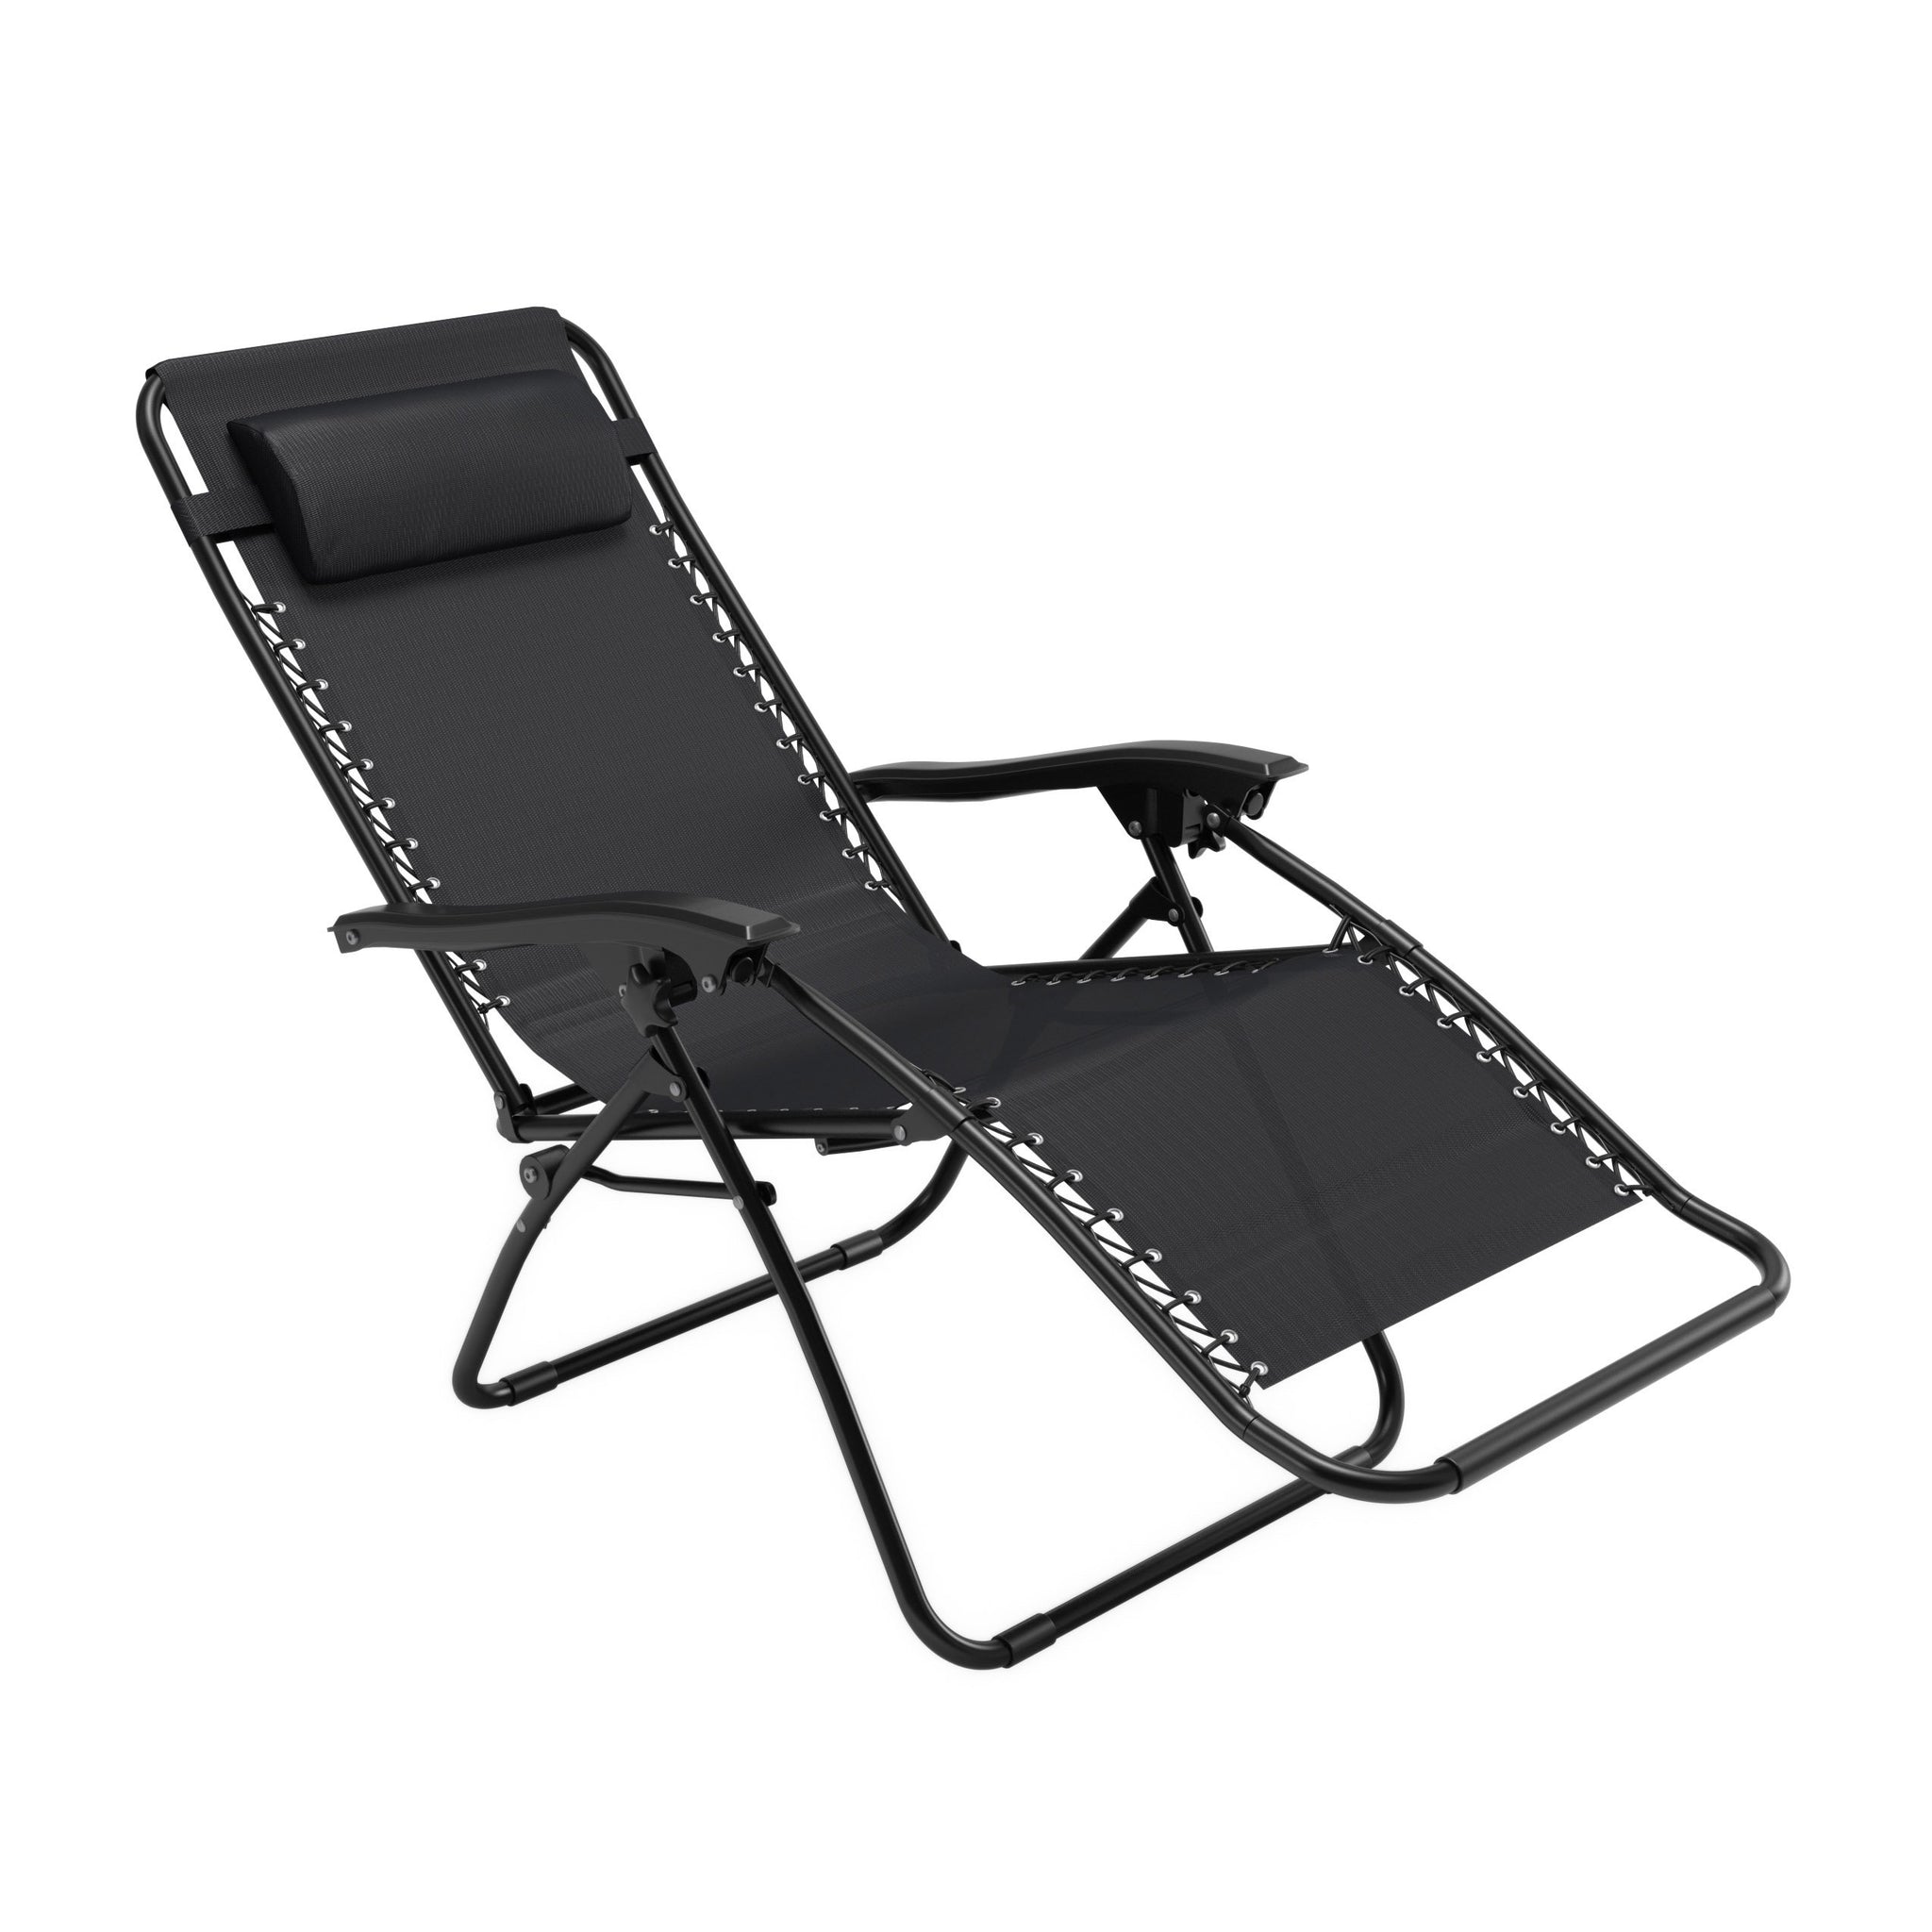 Riverside Textured Zero Gravity Patio Lounger Clearance